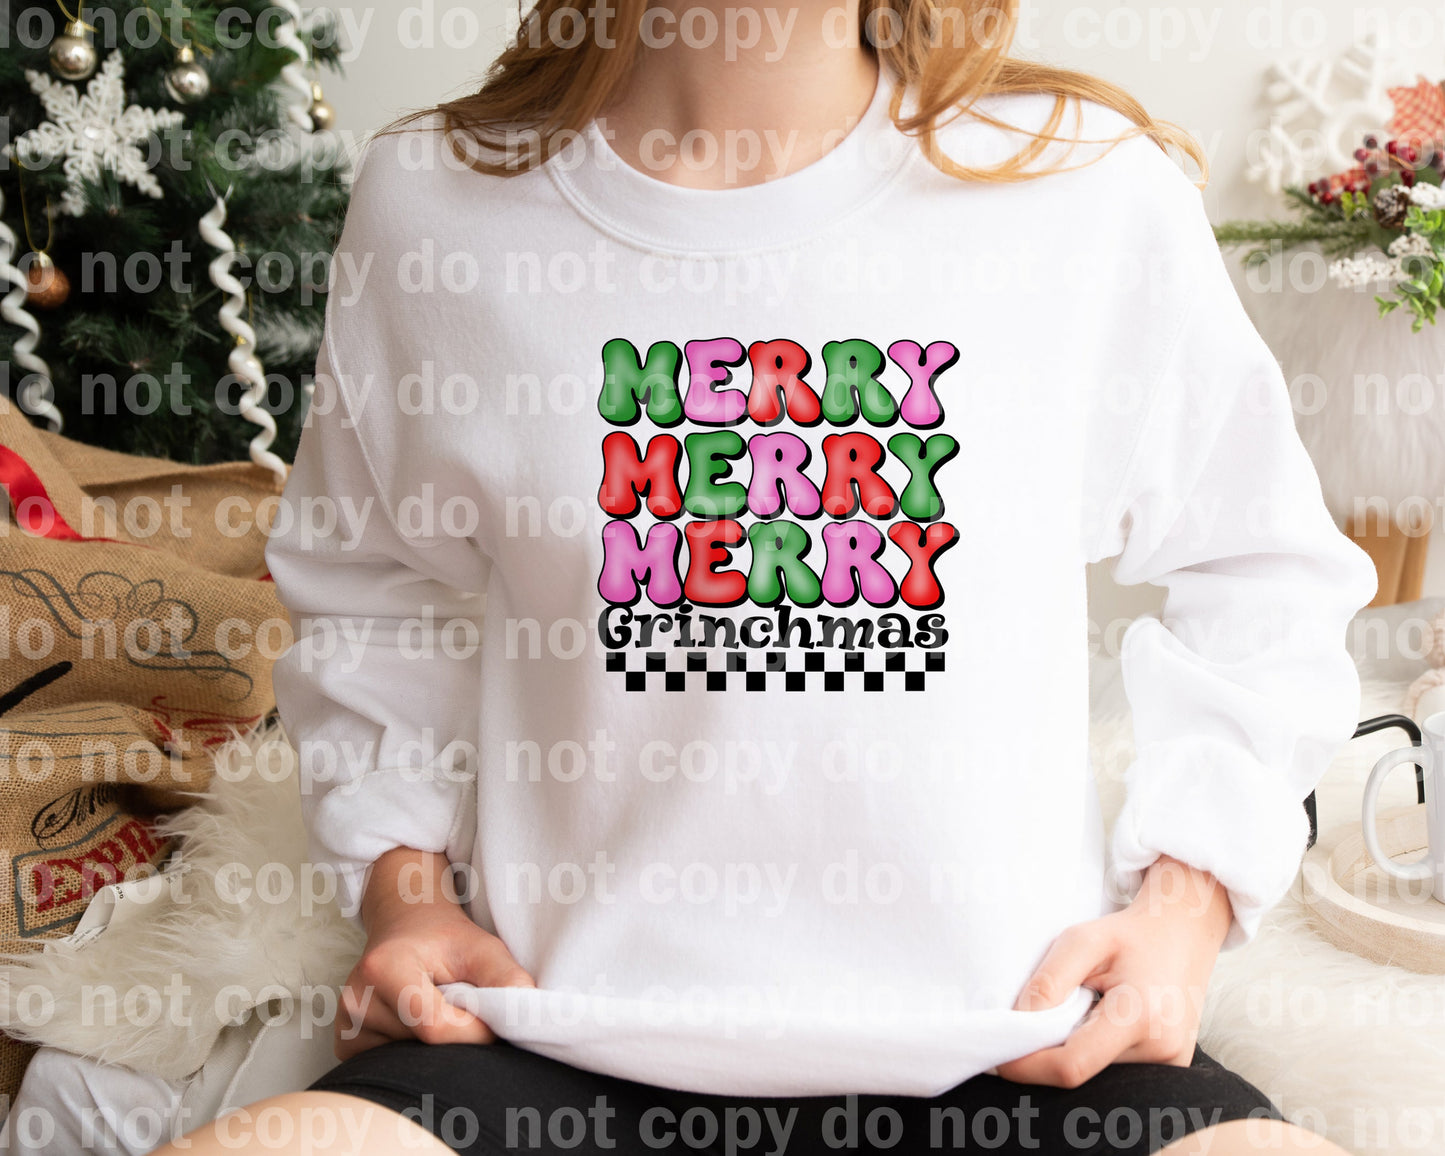 Merry Merry Merry Dream Print or Sublimation Print